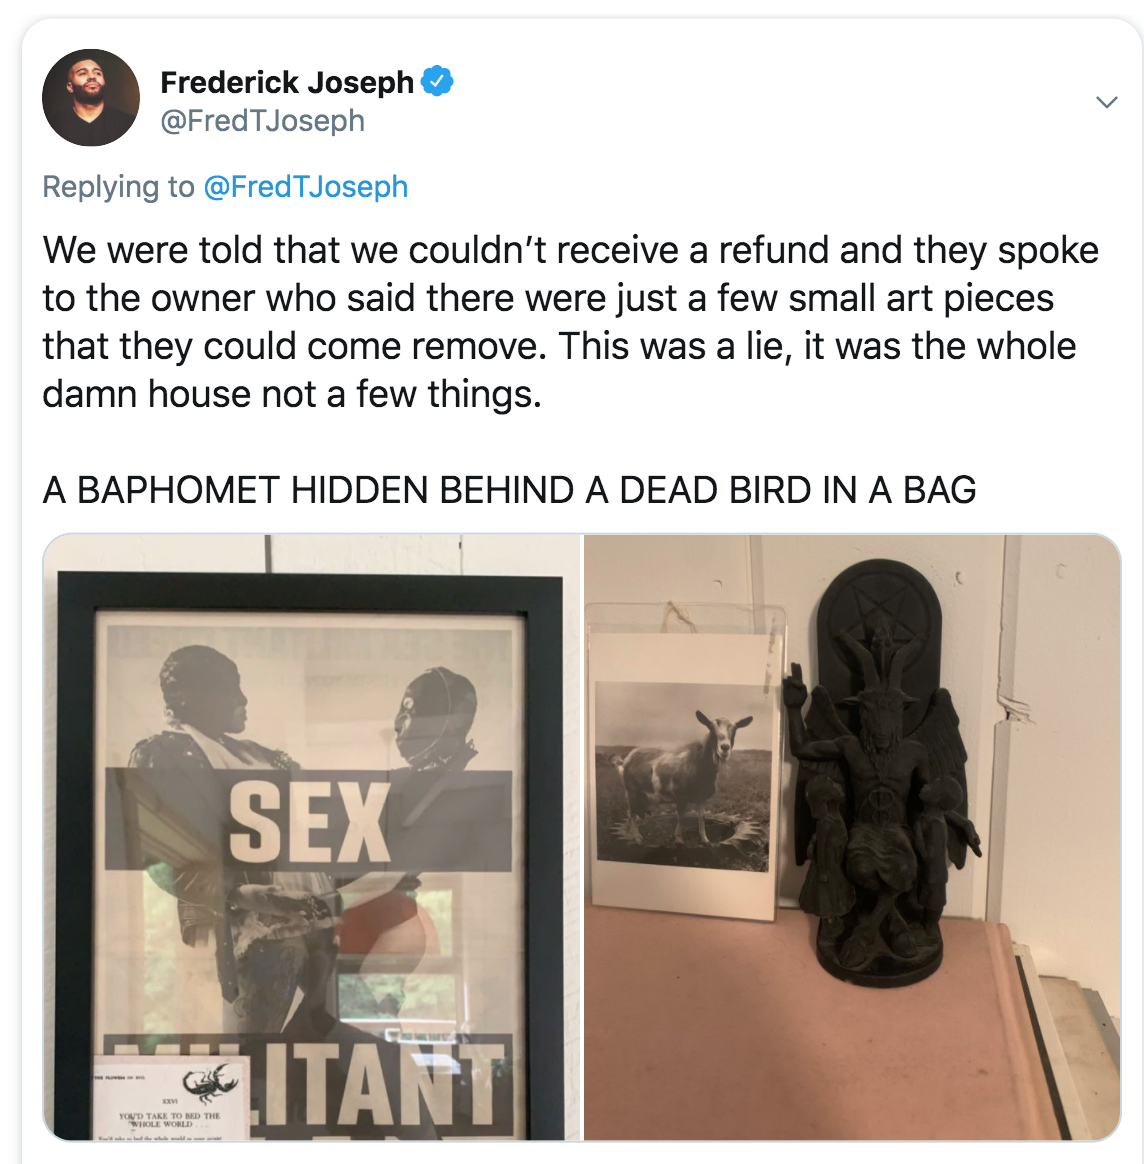 communication - Frederick Joseph We were told that we couldn't receive a refund and they spoke to the owner who said there were just a few small art pieces that they could come remove. This was a lie, it was the whole damn house not a few things. A Baphom